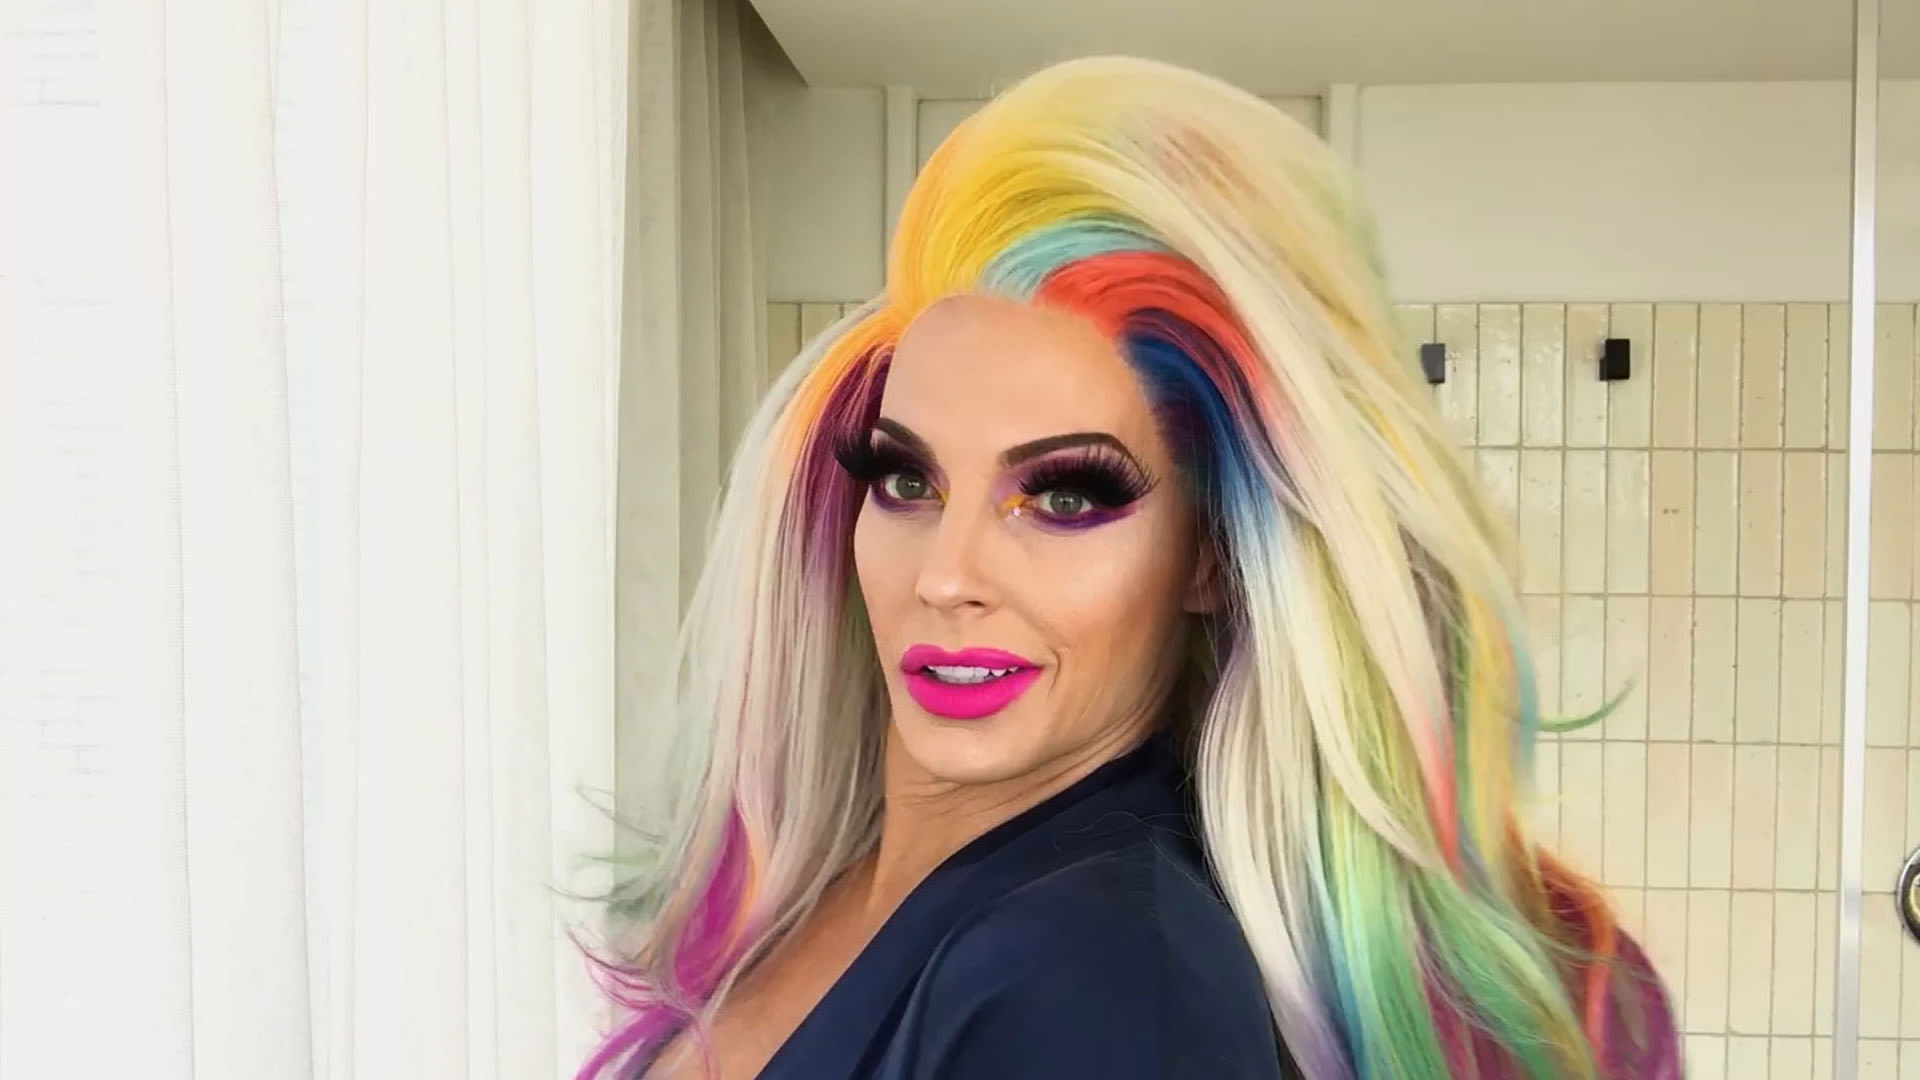 RuPaul’s Drag Race Star Alyssa Edwards' Guide to Pretty-in-Pink Makeup...